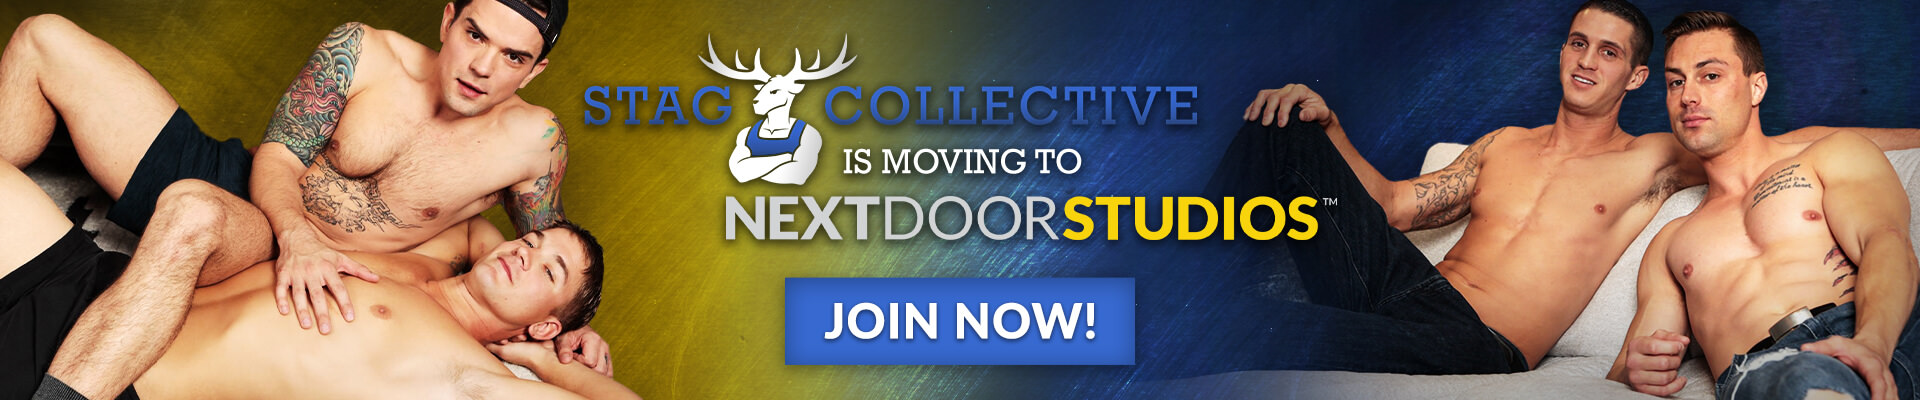 Join Stag Collective